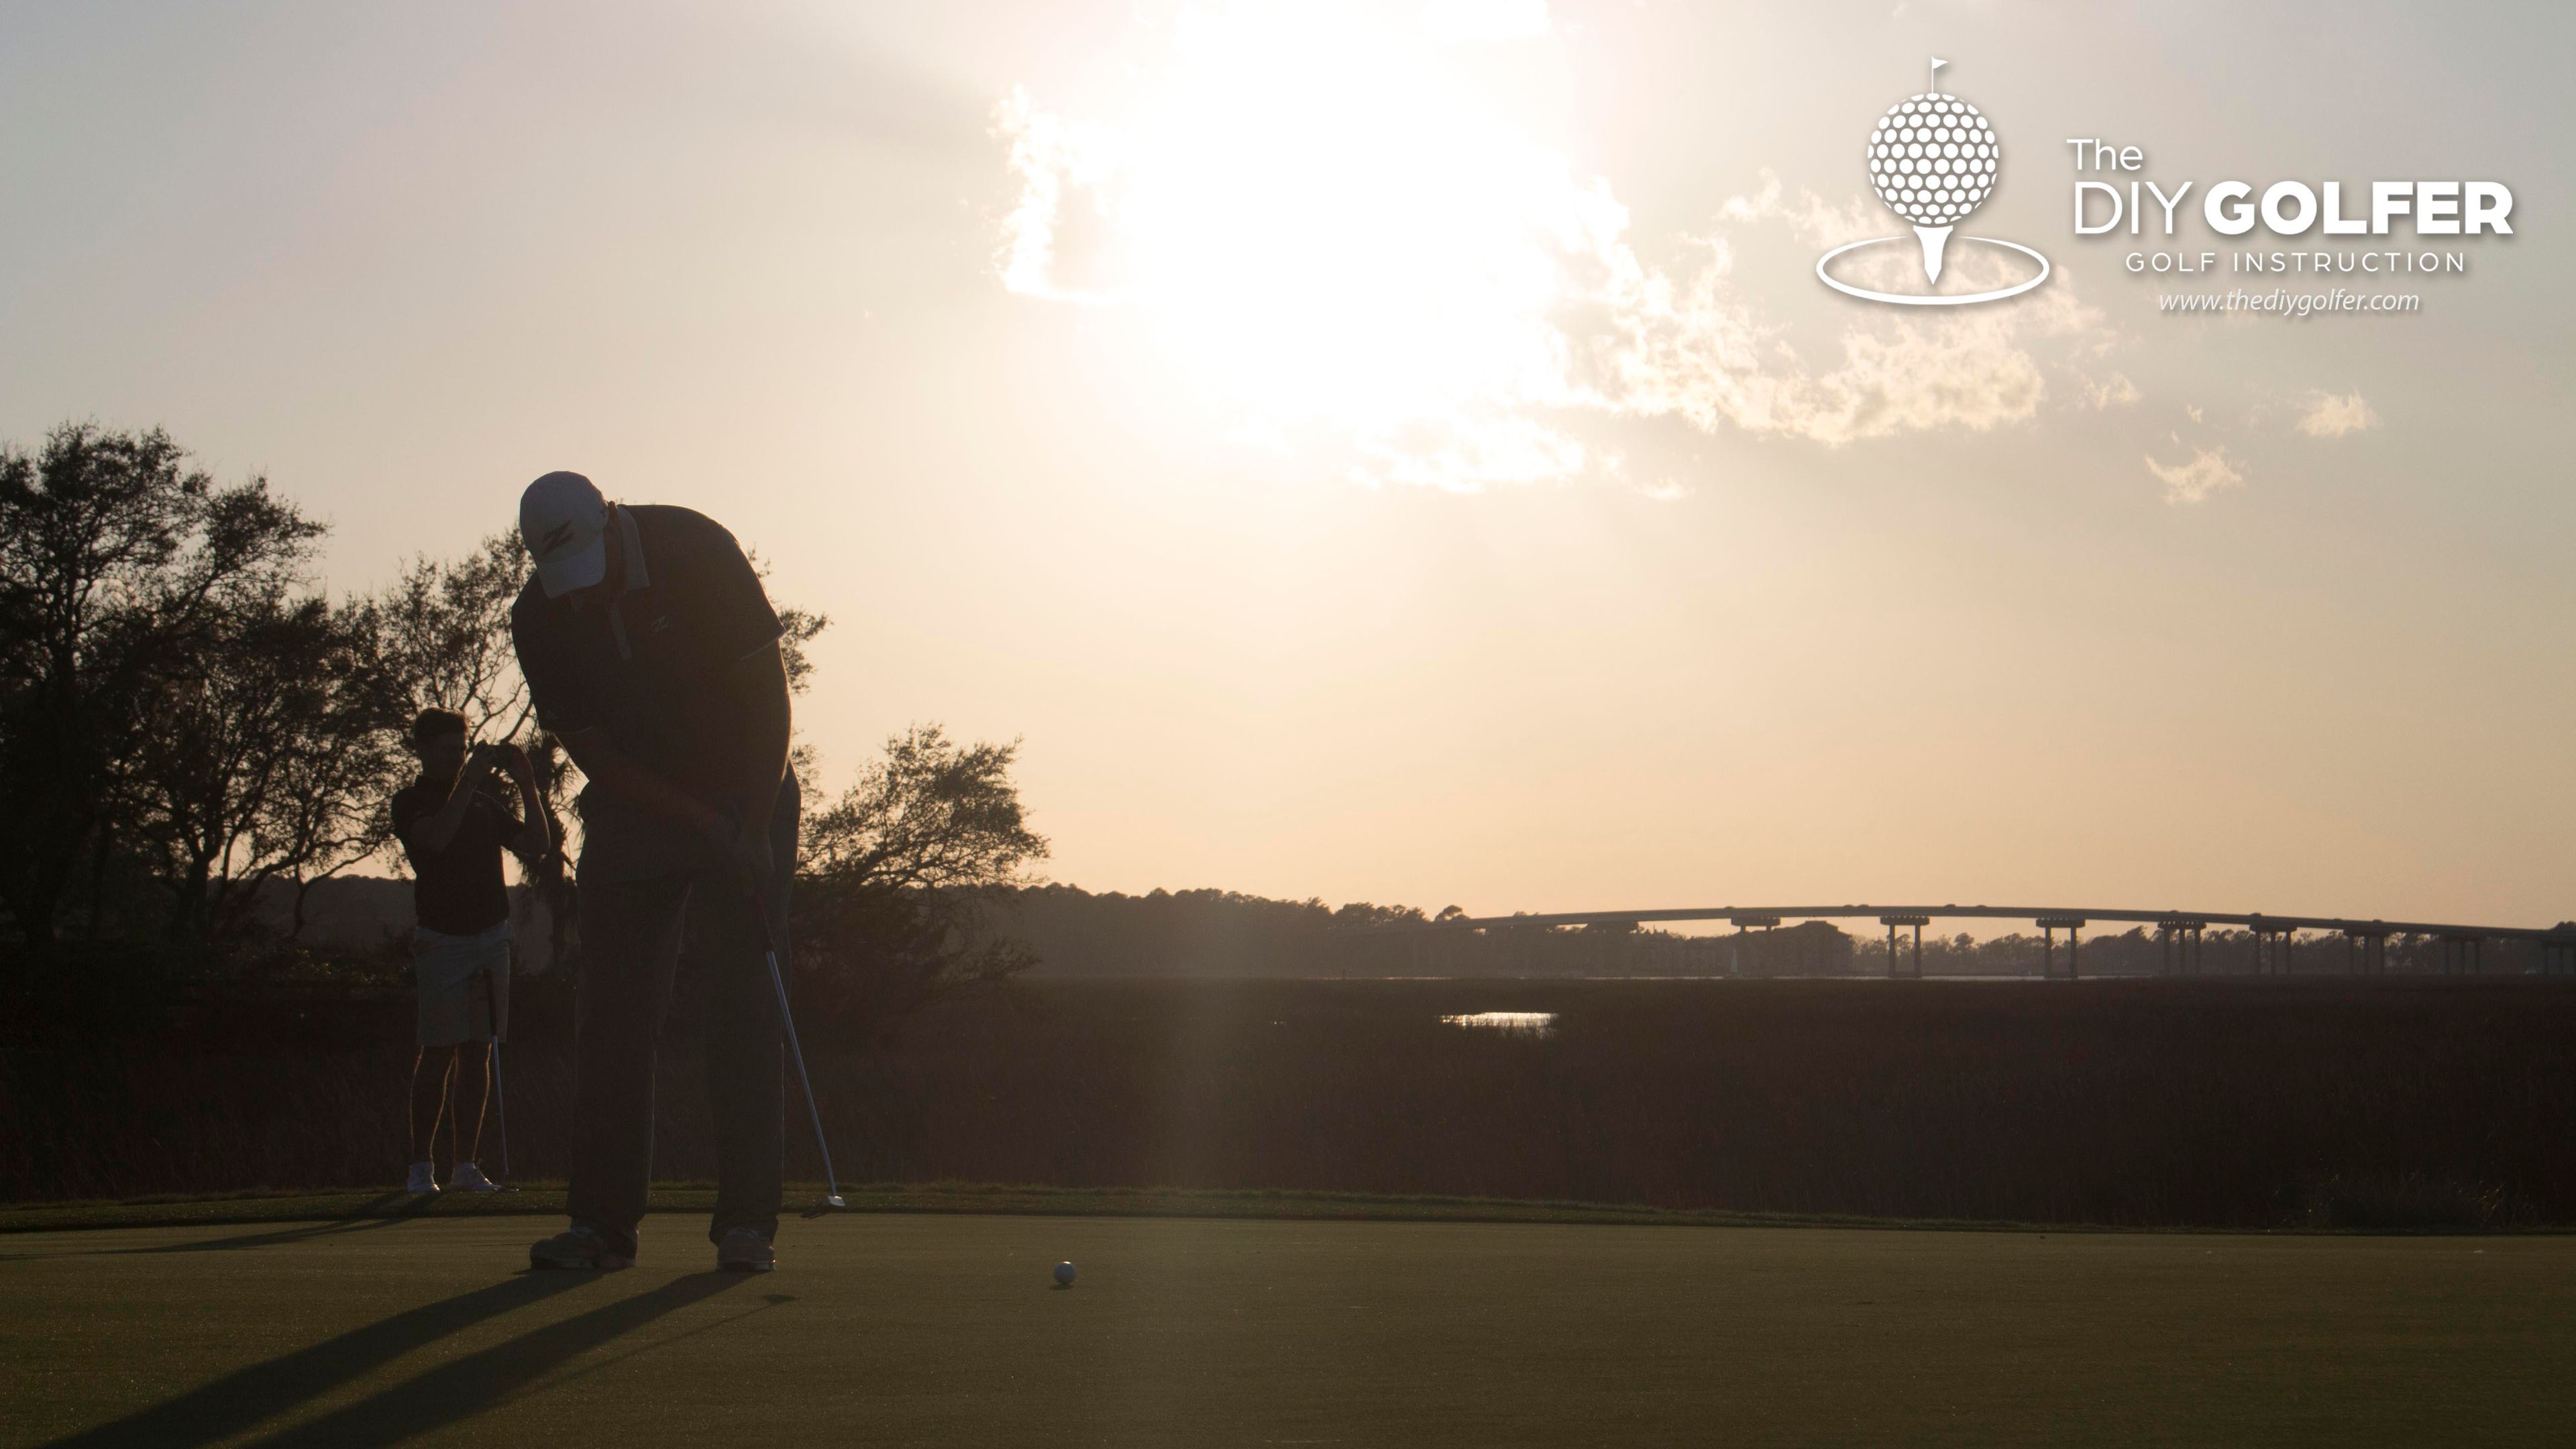 Golf Putting Photo: Hitting Putt in the Sunset